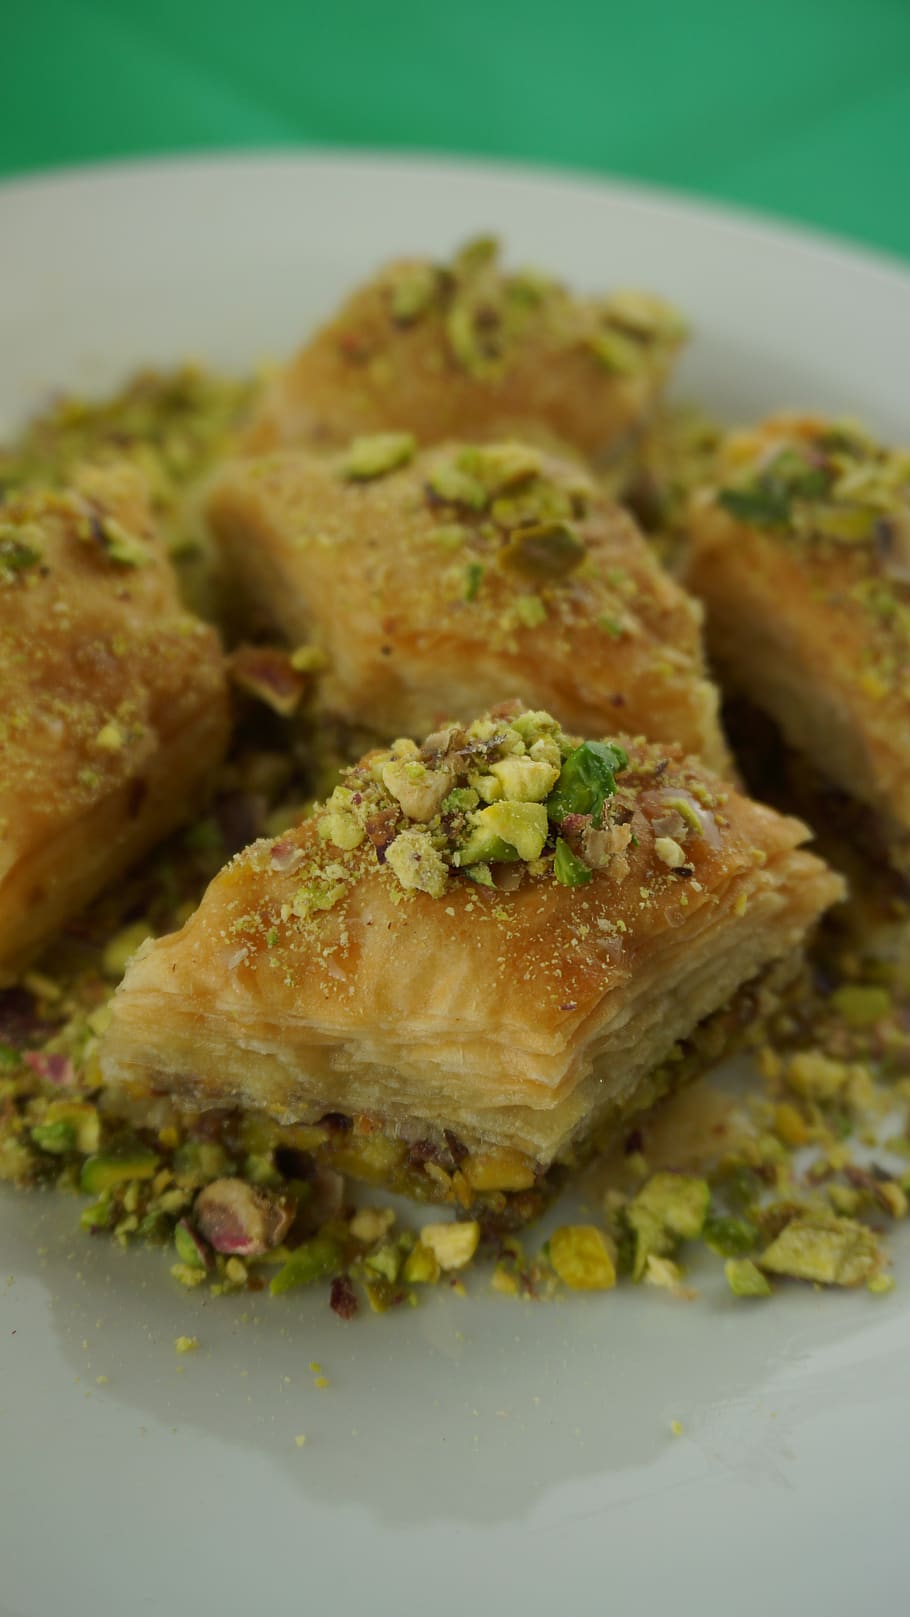 baklava with pistachios, oriental pastries, sweet pastries, ready-to-eat, food, food and drink, close-up, plate, freshness, indoors